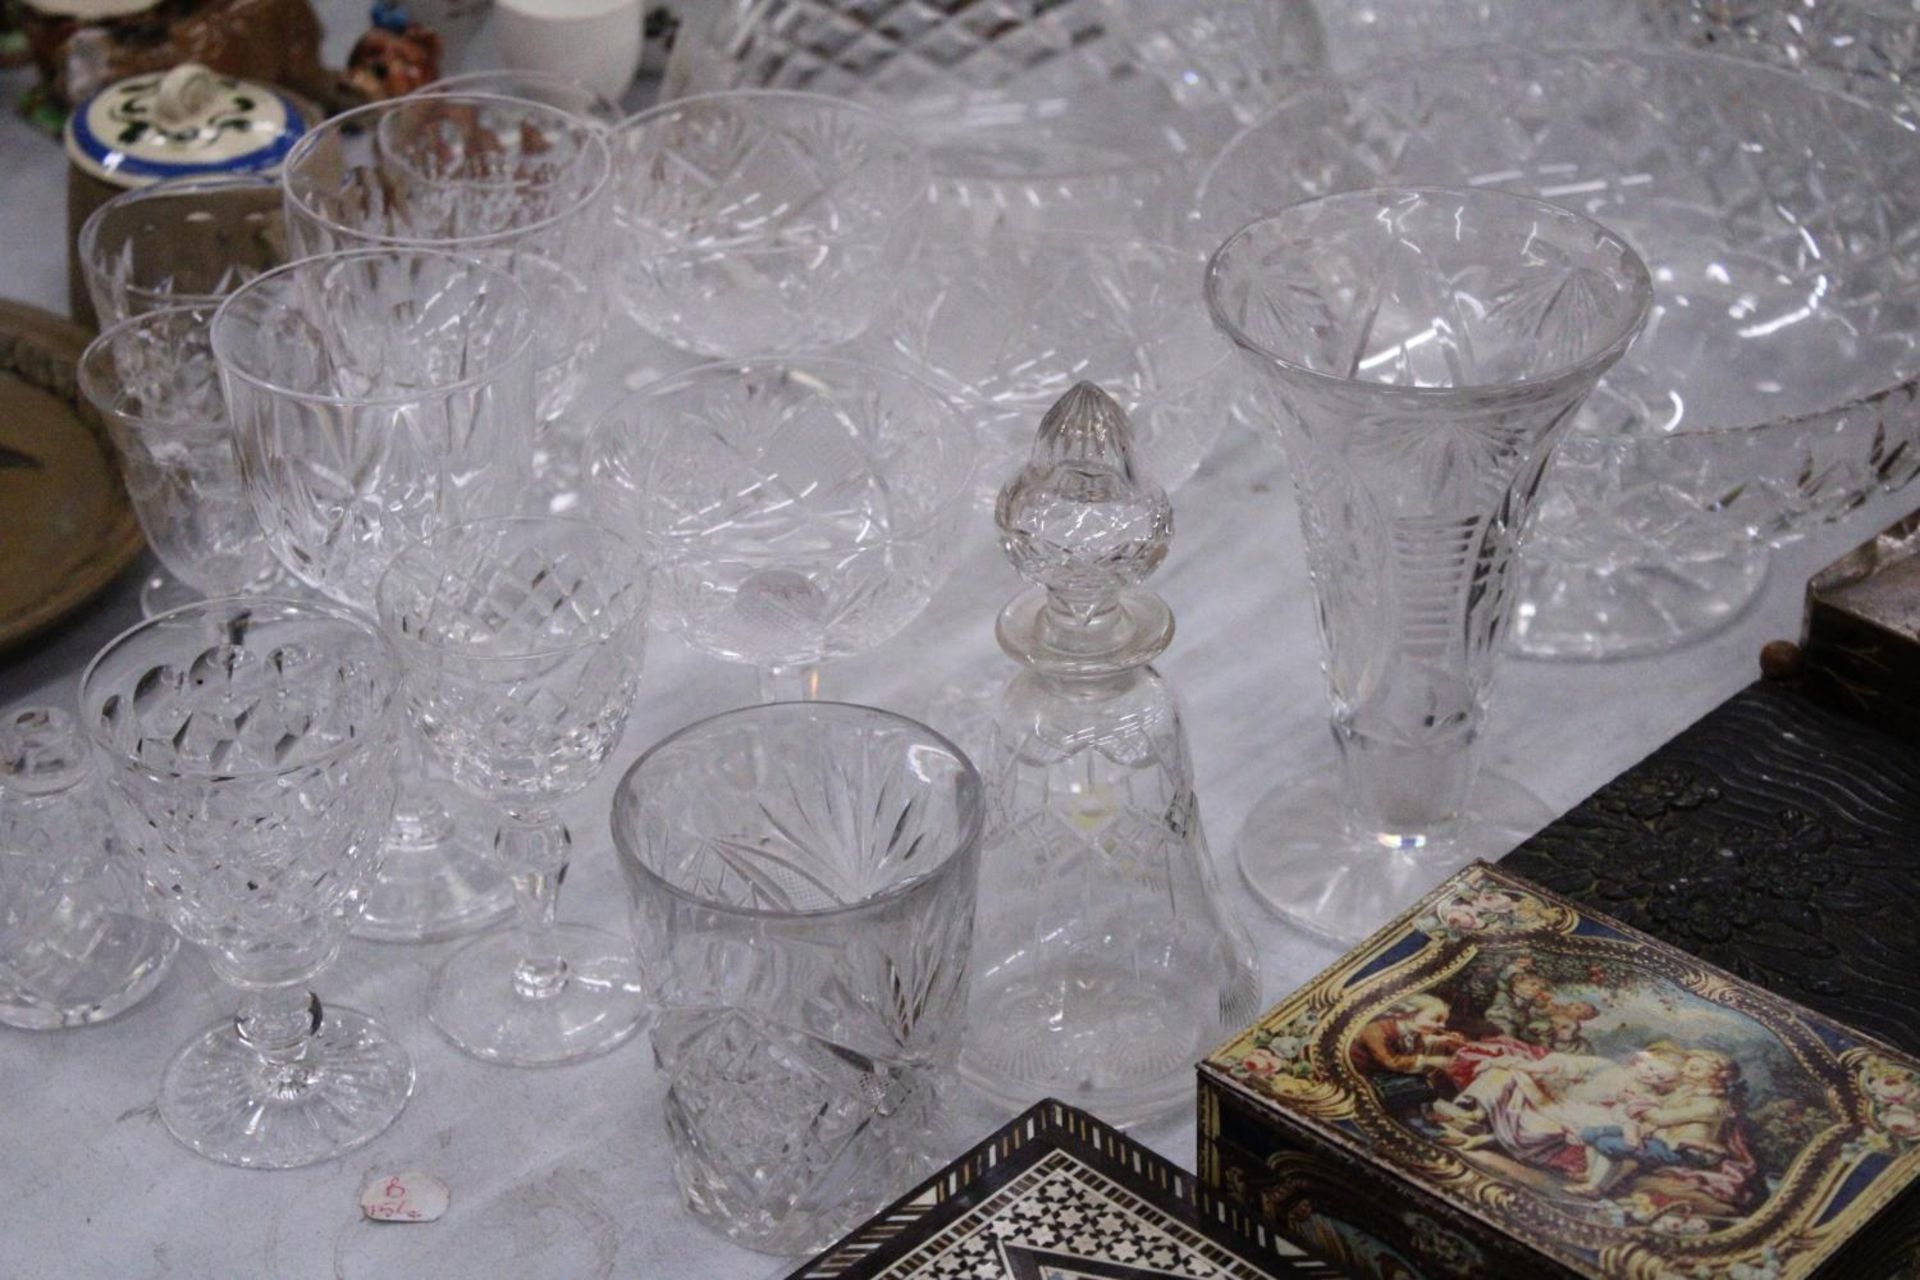 A LARGE QUANTITY OF GLASSWARE TO INCLUDE BOWLS, VASES, WINE GLASSES, ETC - Image 3 of 6